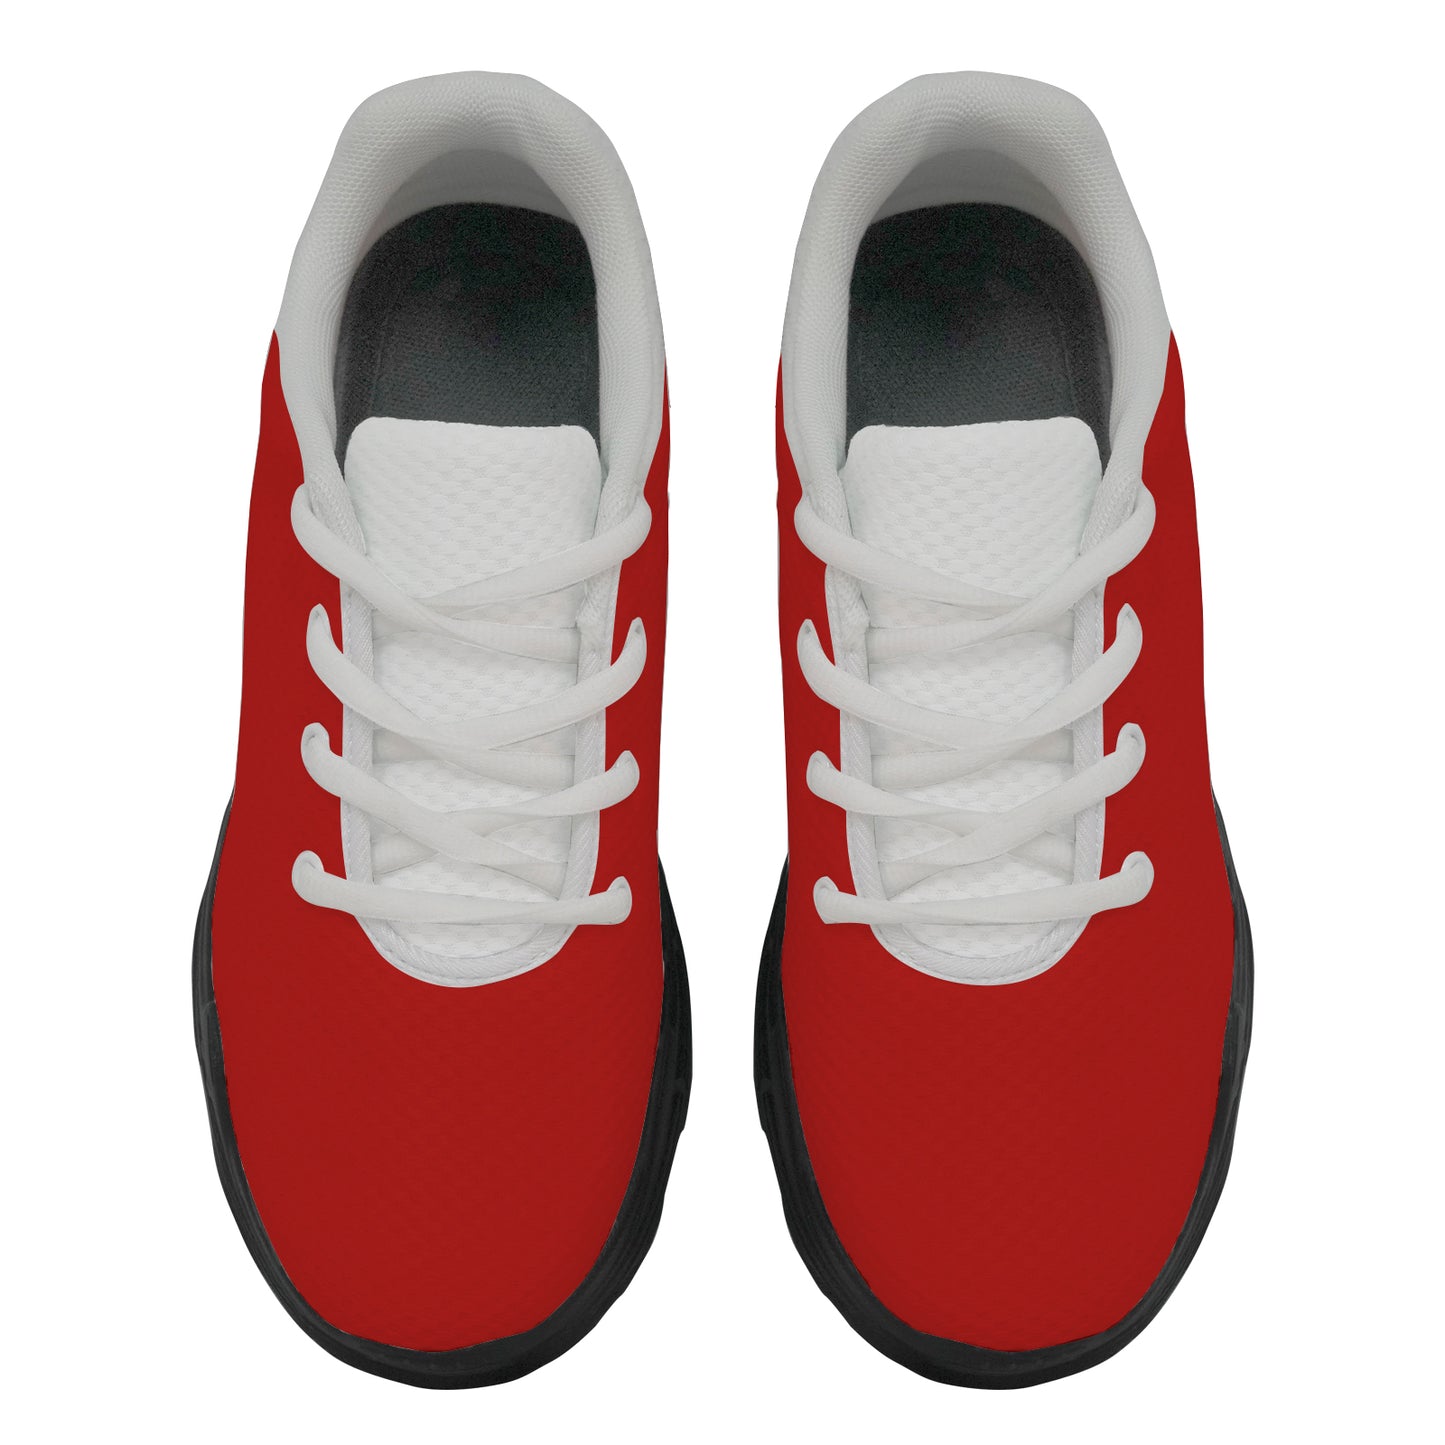 Lyra Men's Chunky Shoes - Red